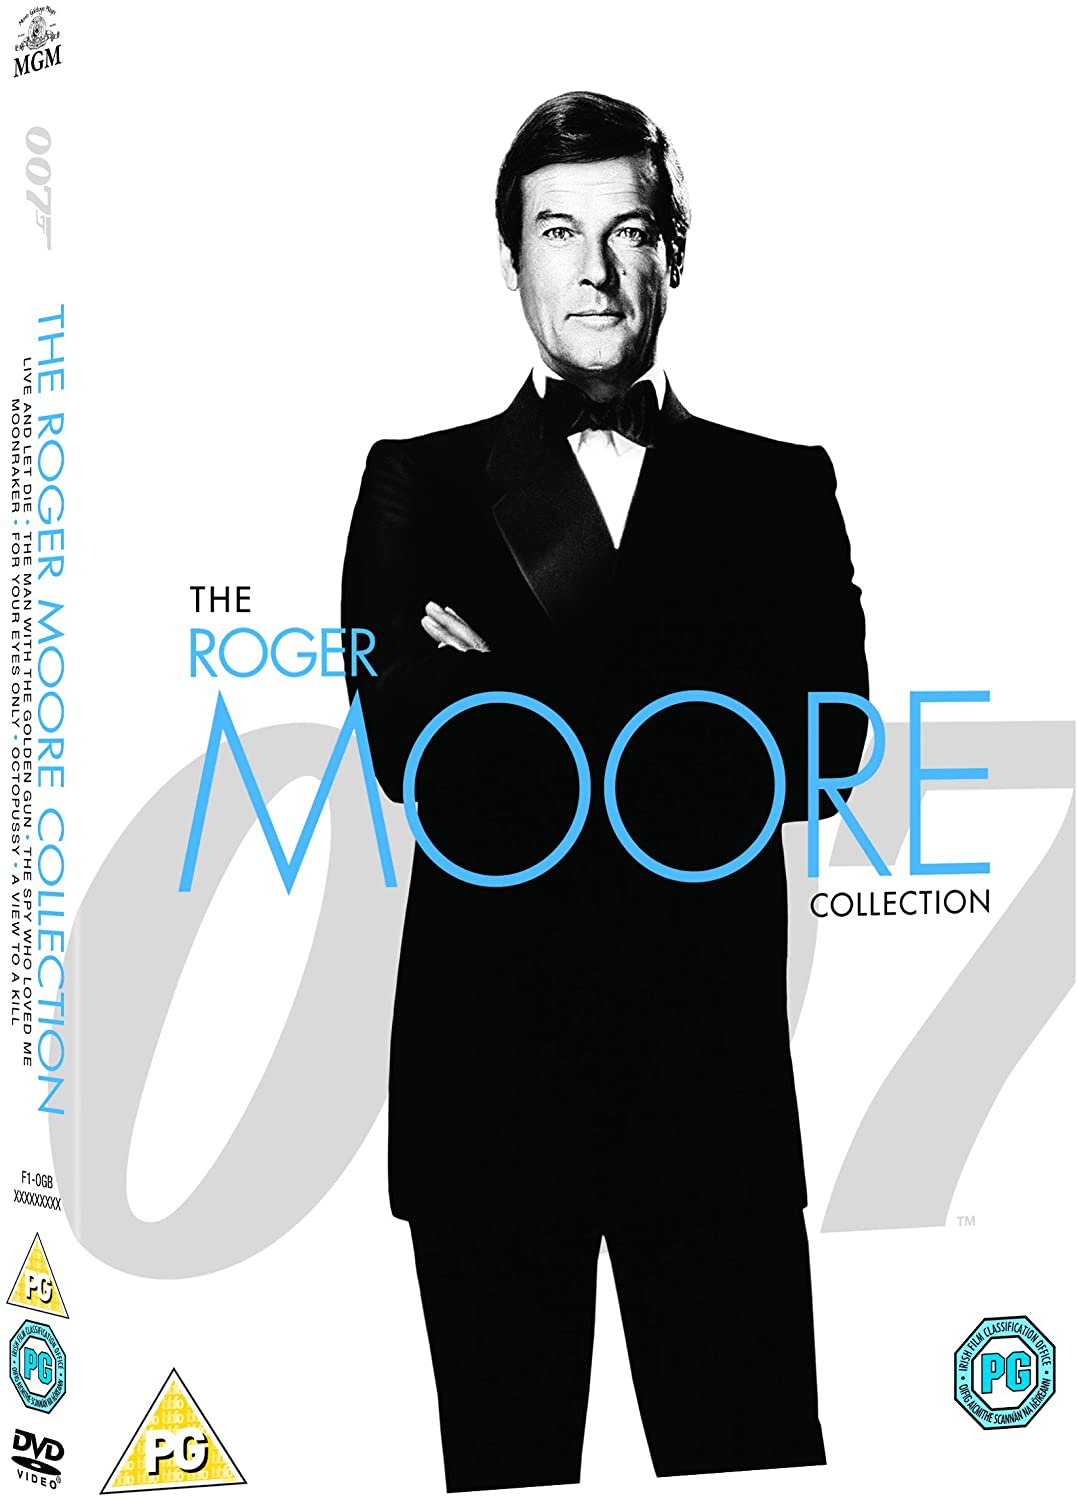 James Bond: The Roger Moore Collection [2015] [2017] - Action/Adventure [DVD]